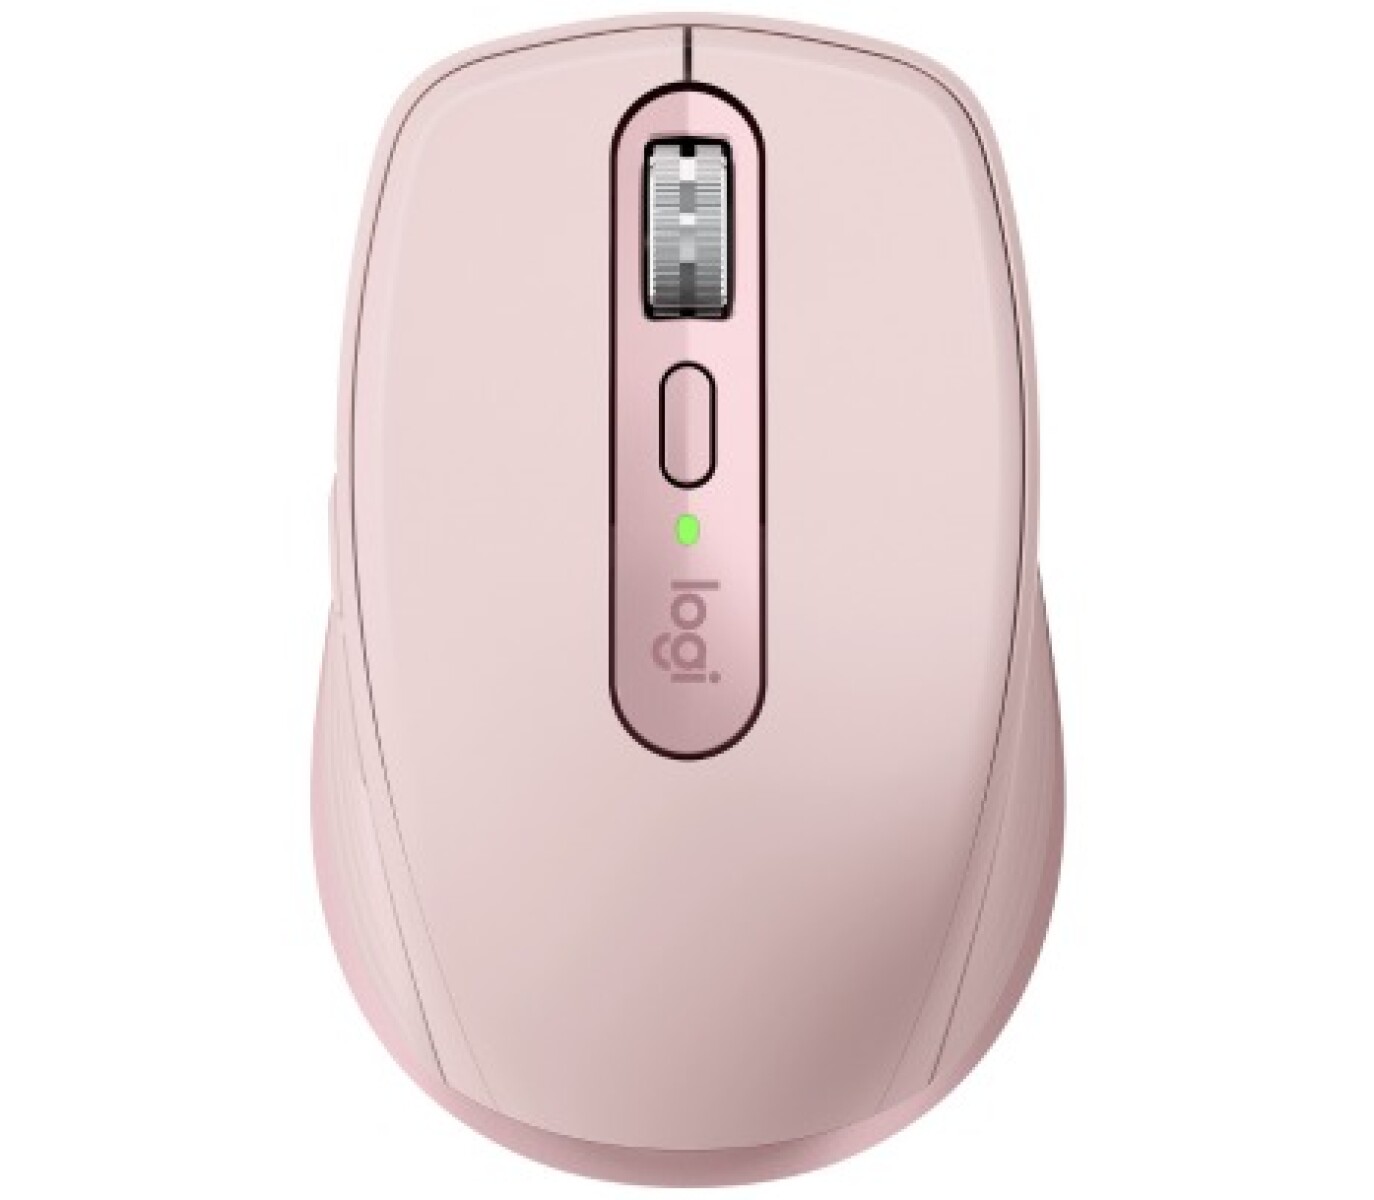 LOGITECH 910-006934 MOUSE MX ANYWHERE 3S ROSE INAL+BT - Logitech 910-006934 Mouse Mx Anywhere 3s Rose Inal+bt 